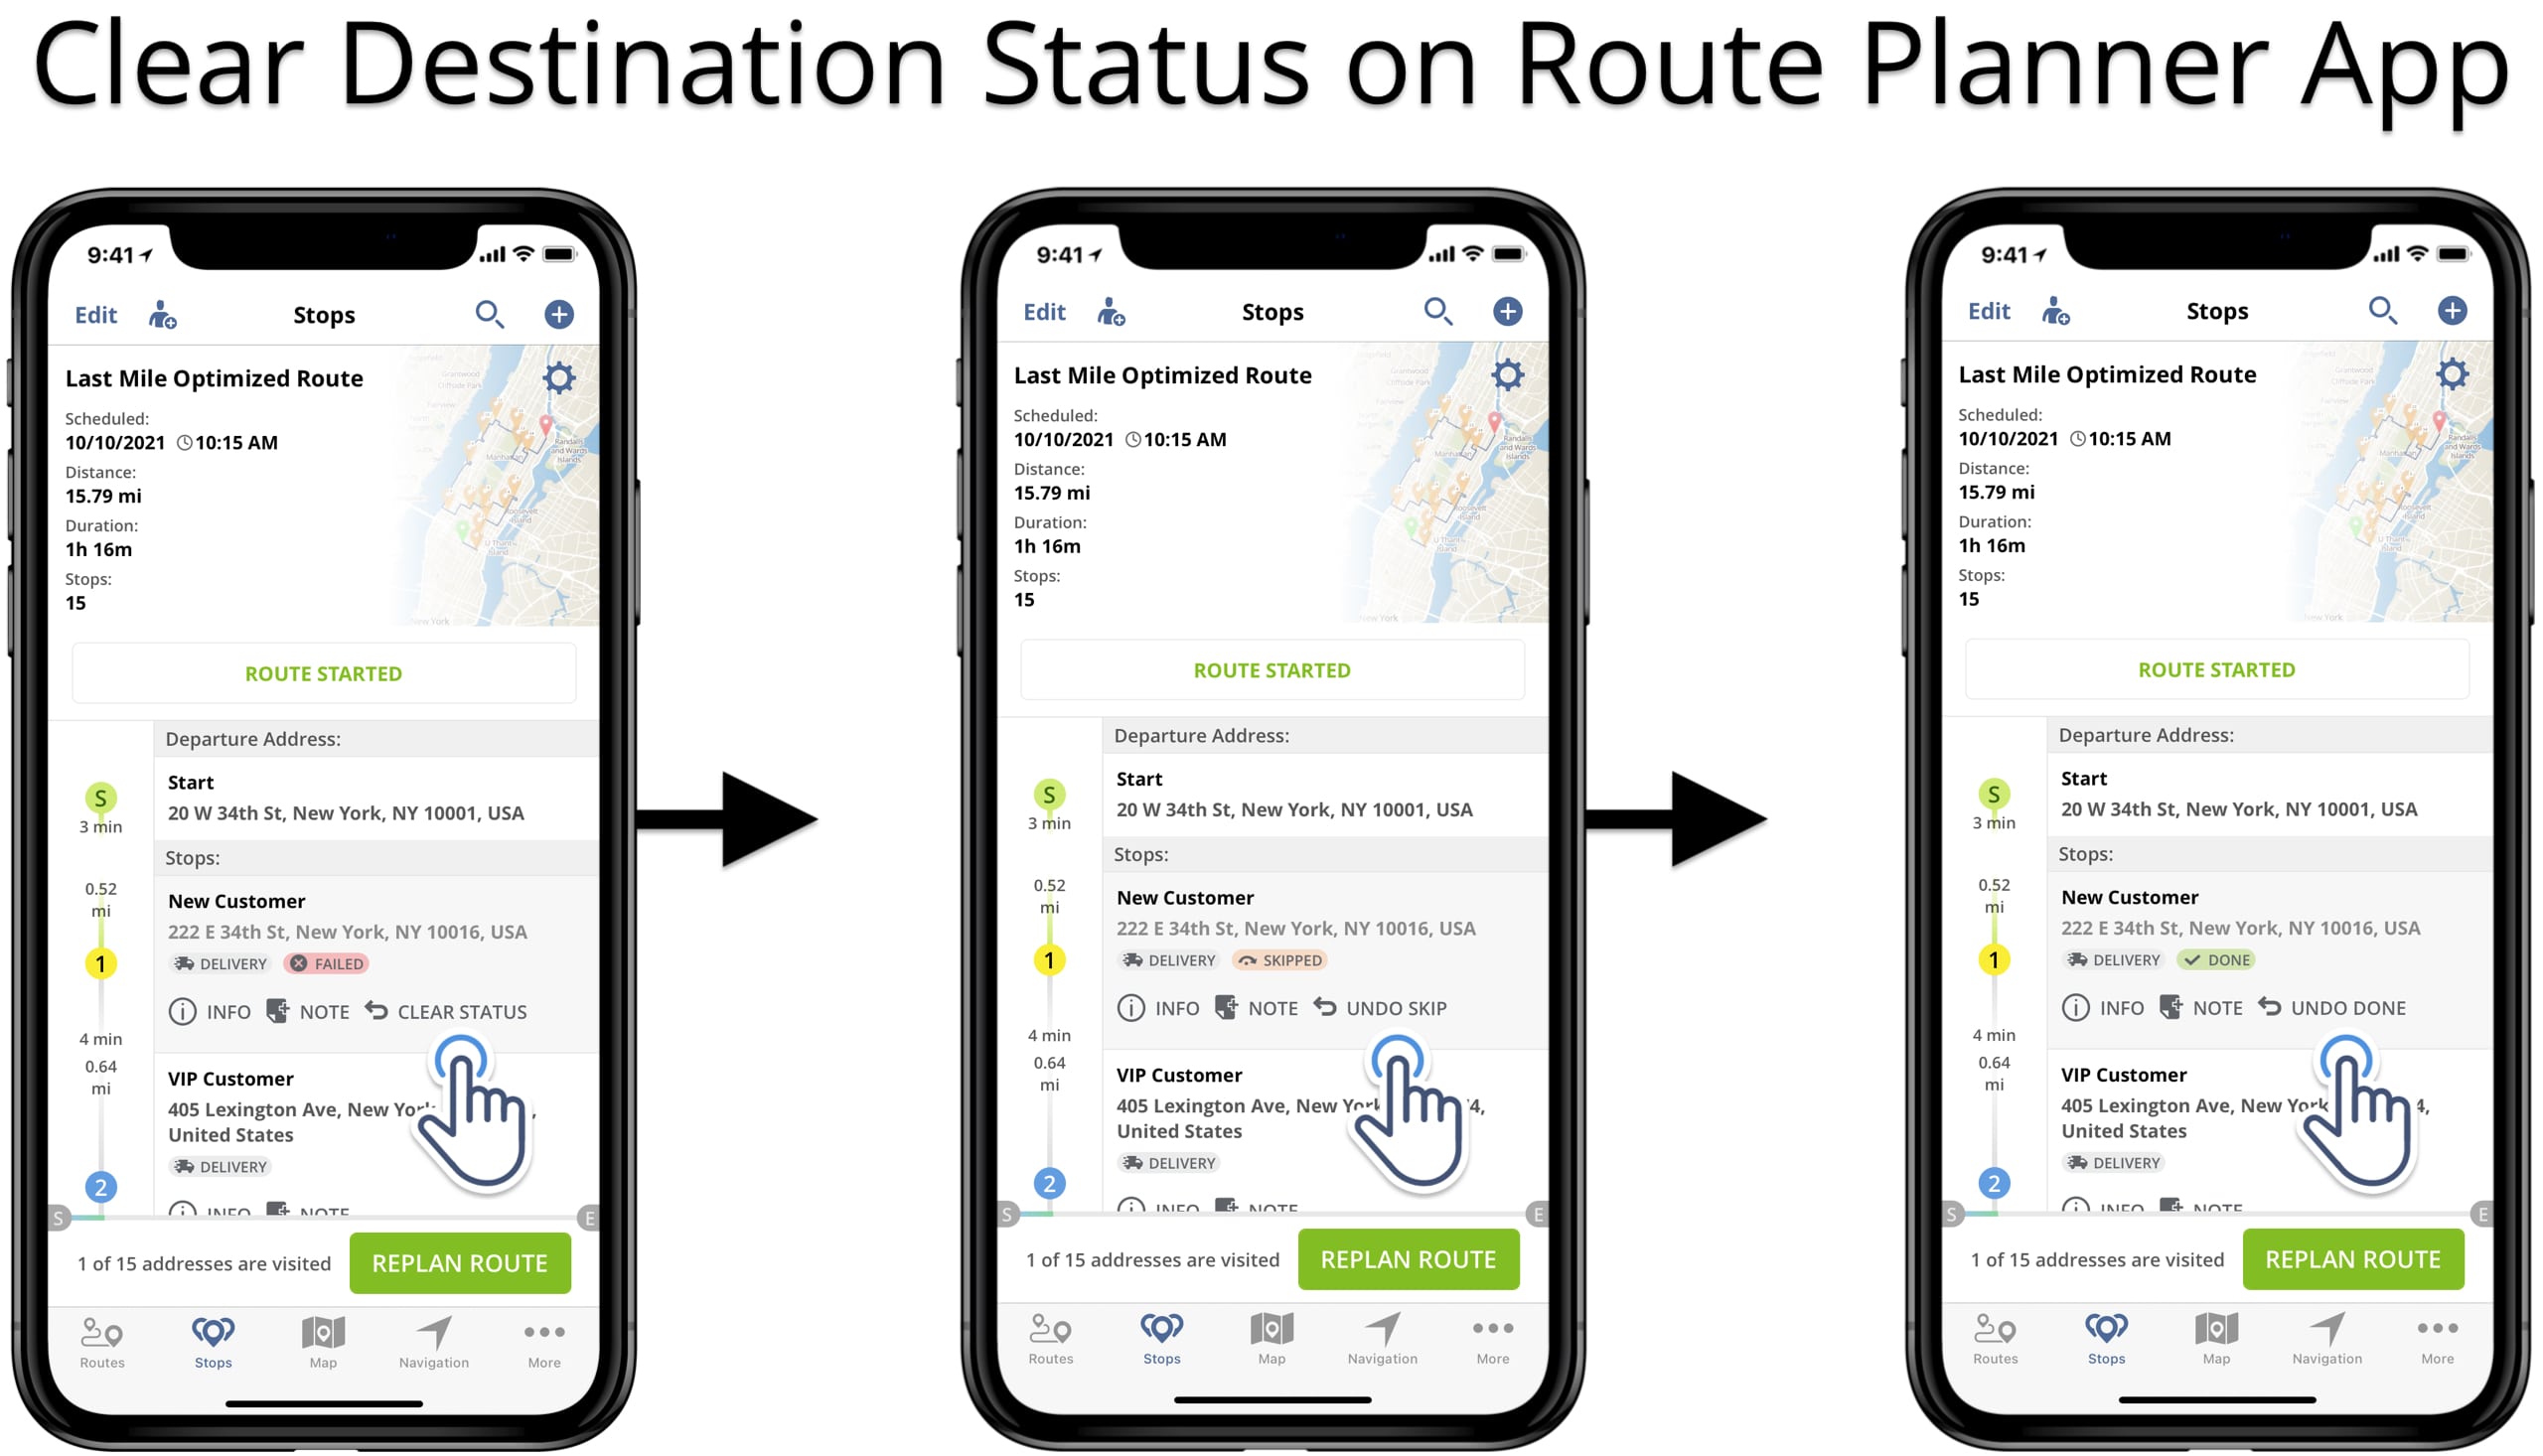 Clear route destination status for failed, skipped, and done orders on the iOS route planner app.